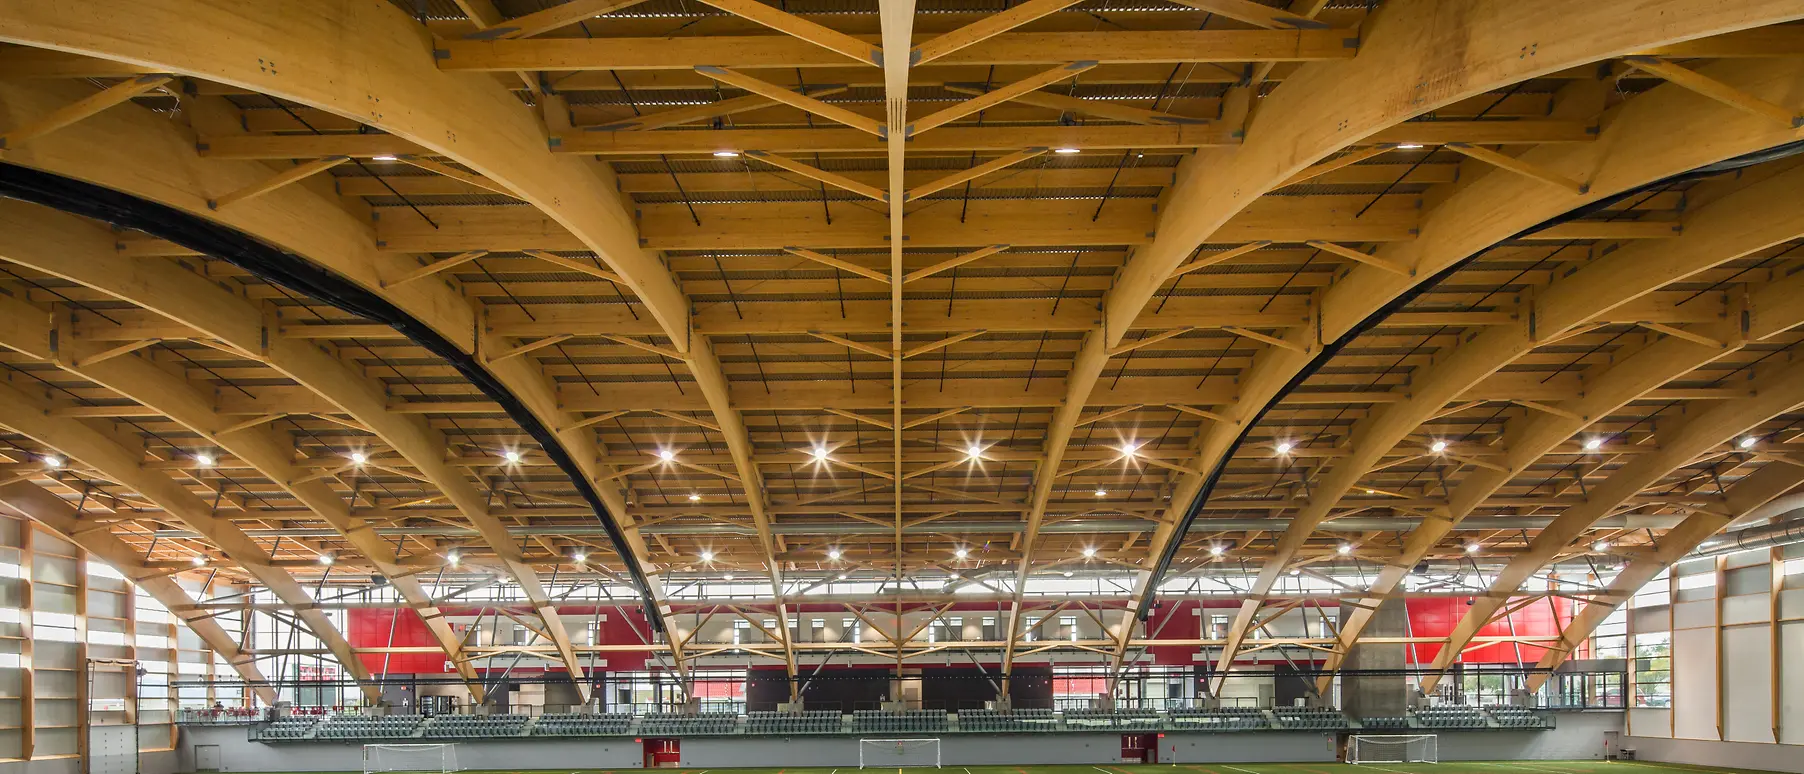 Picture of sports facility using Henkel adhesives in mass timber construction